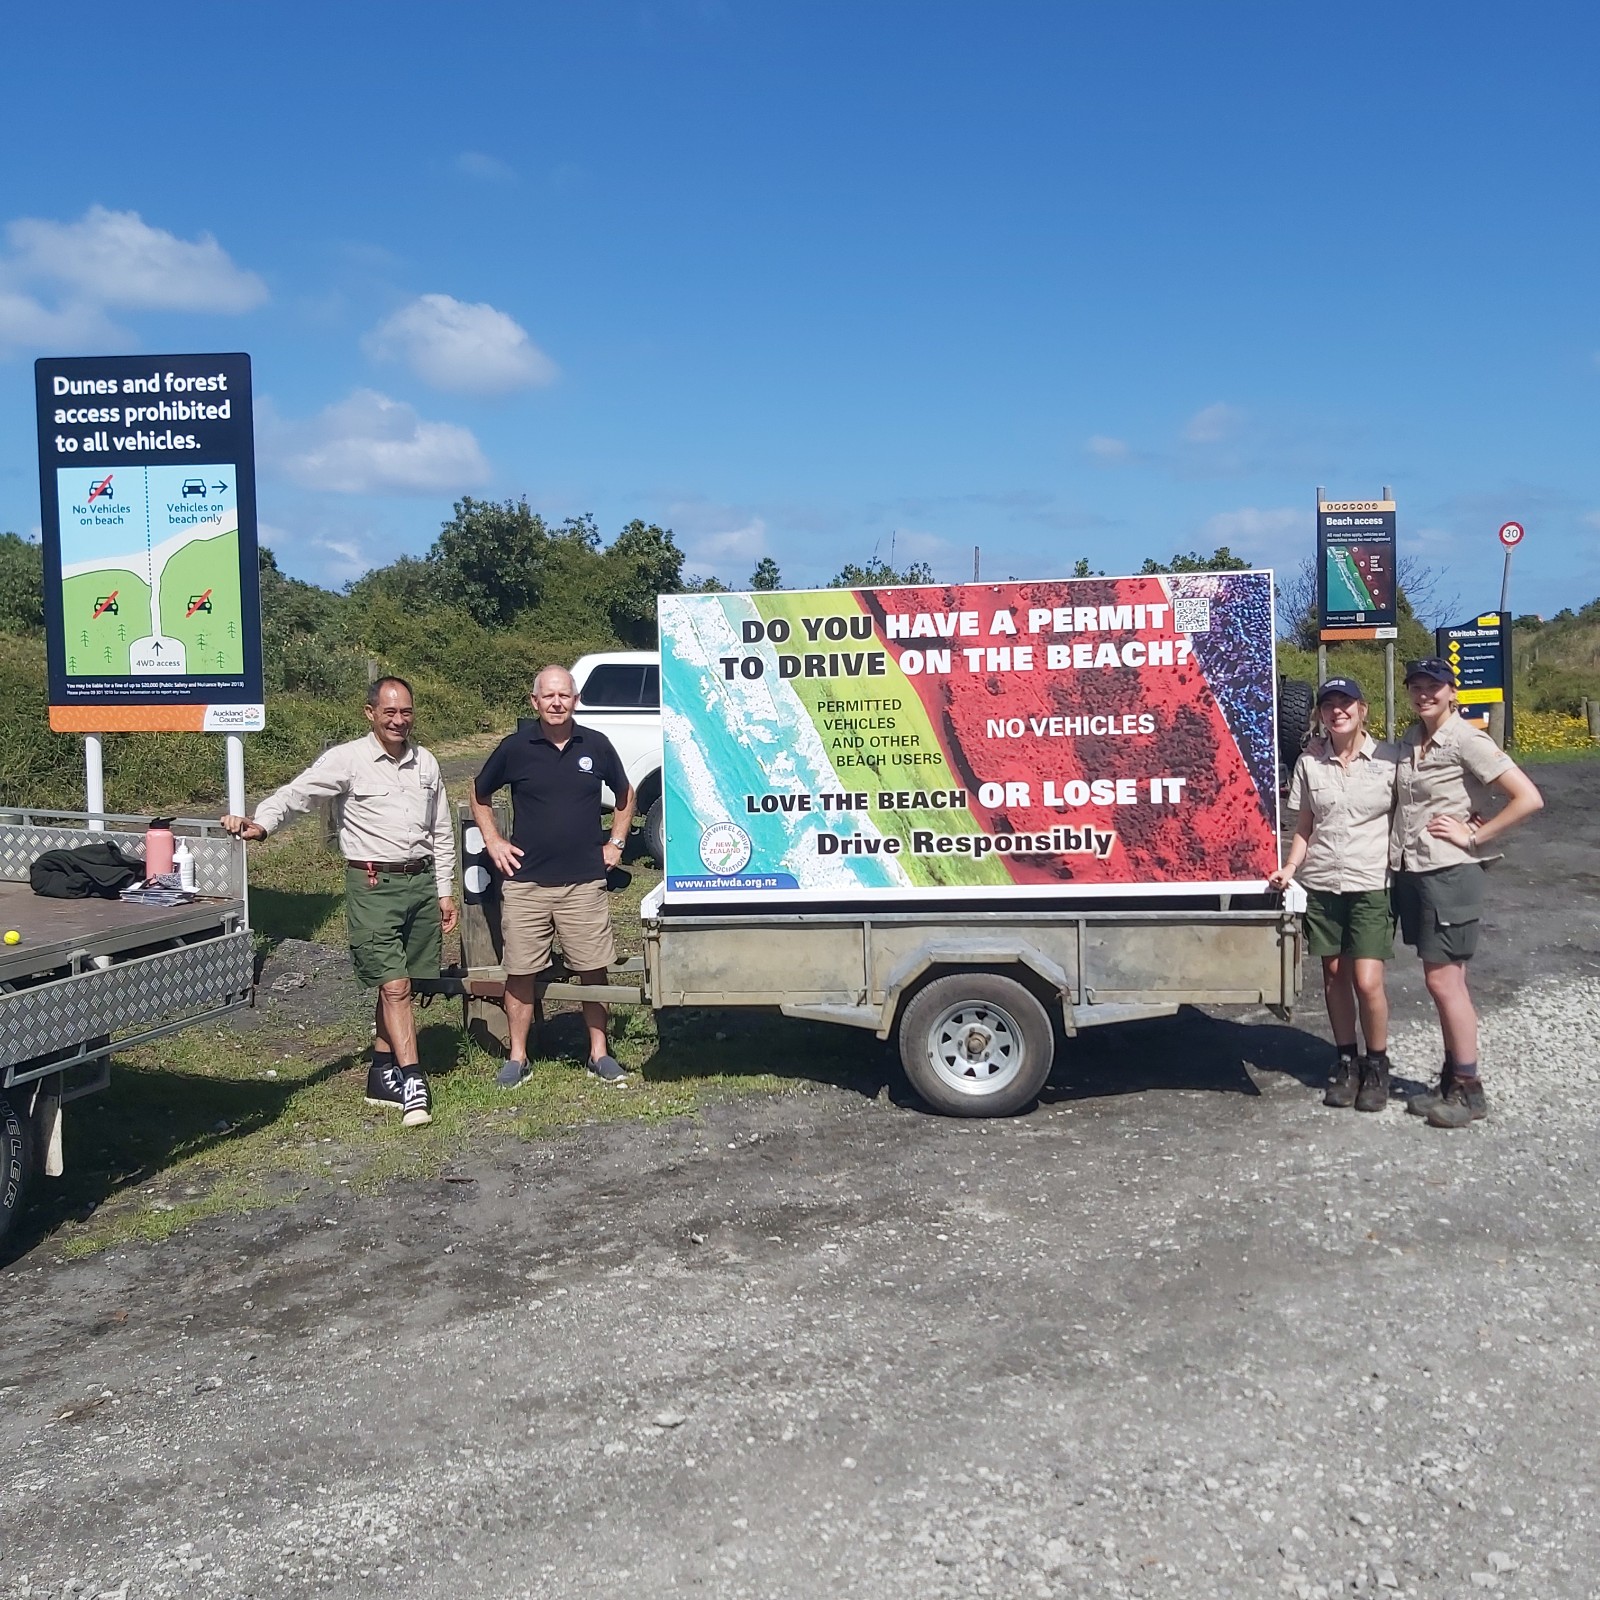 NZ 4WD Association's roving billboard to help educate drivers. L to R: Auckland Council Ranger Joe Rangihuna, NZ4WD Association's Peter Vahry, Auckland Council Summer Ranger Tara McGuire and Auckland Council Summer Ranger Sydney Verrenkamp.